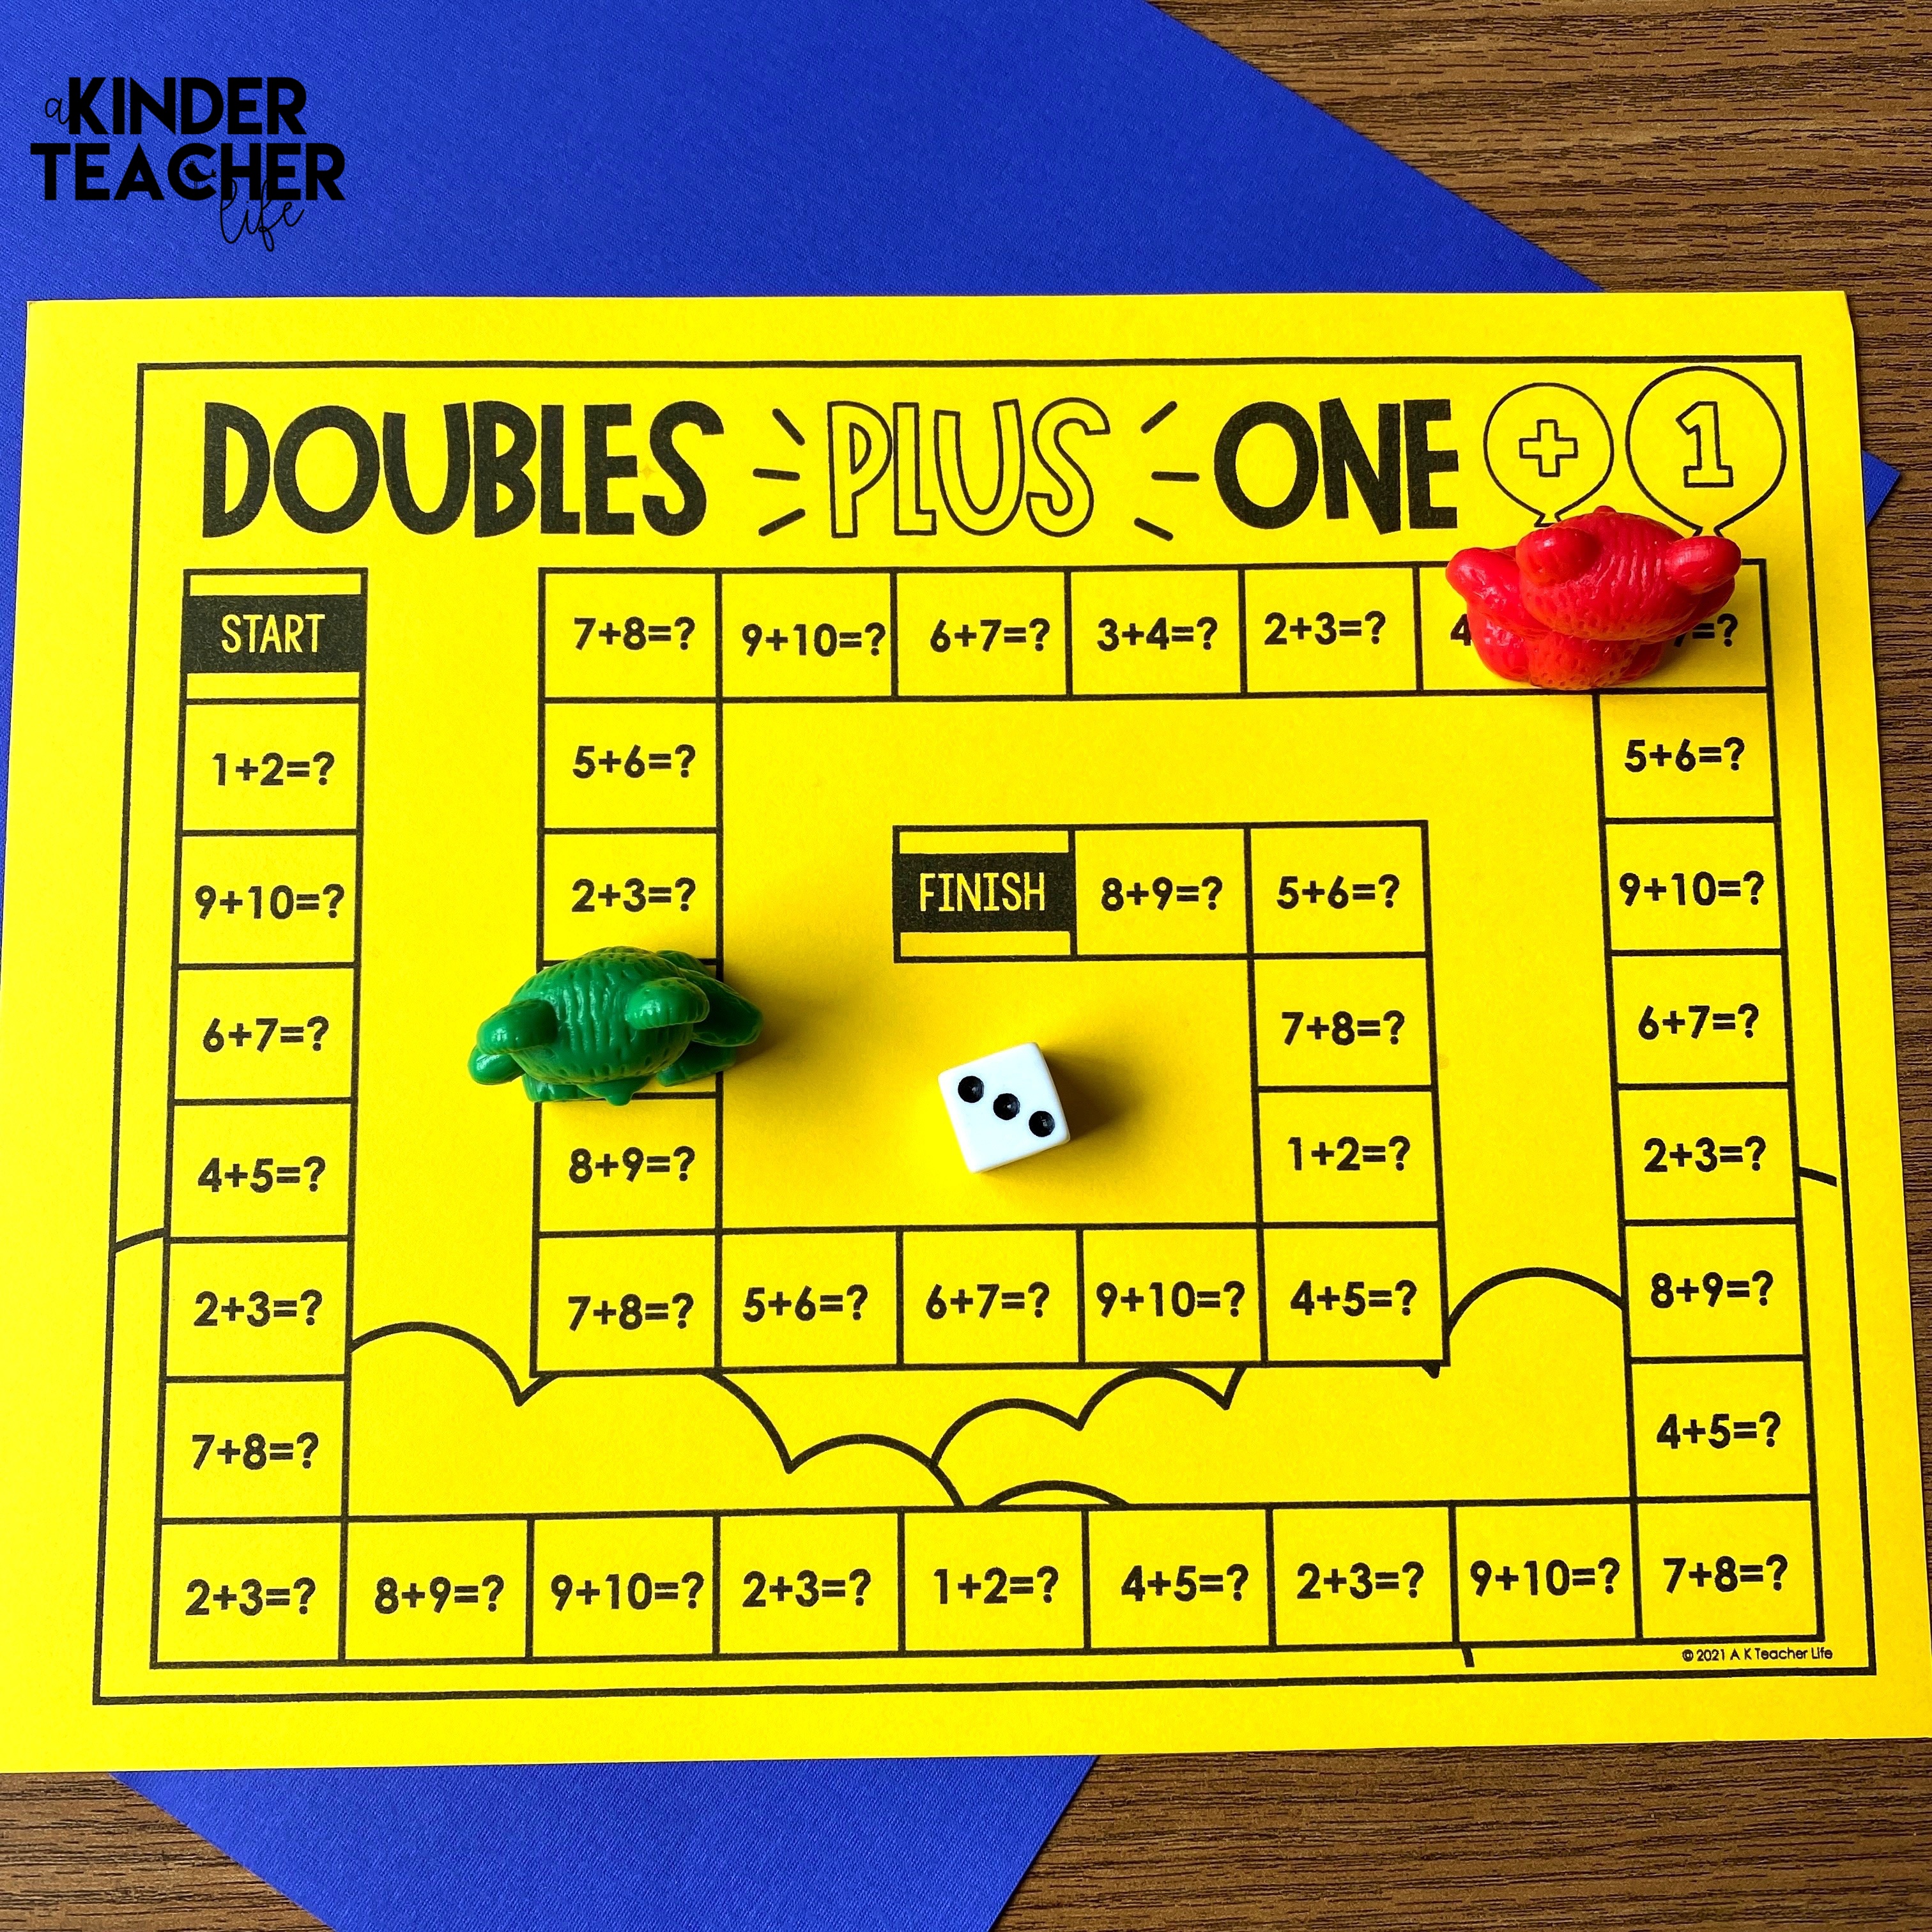 Doubles plus one - Addition math center activities and worksheets